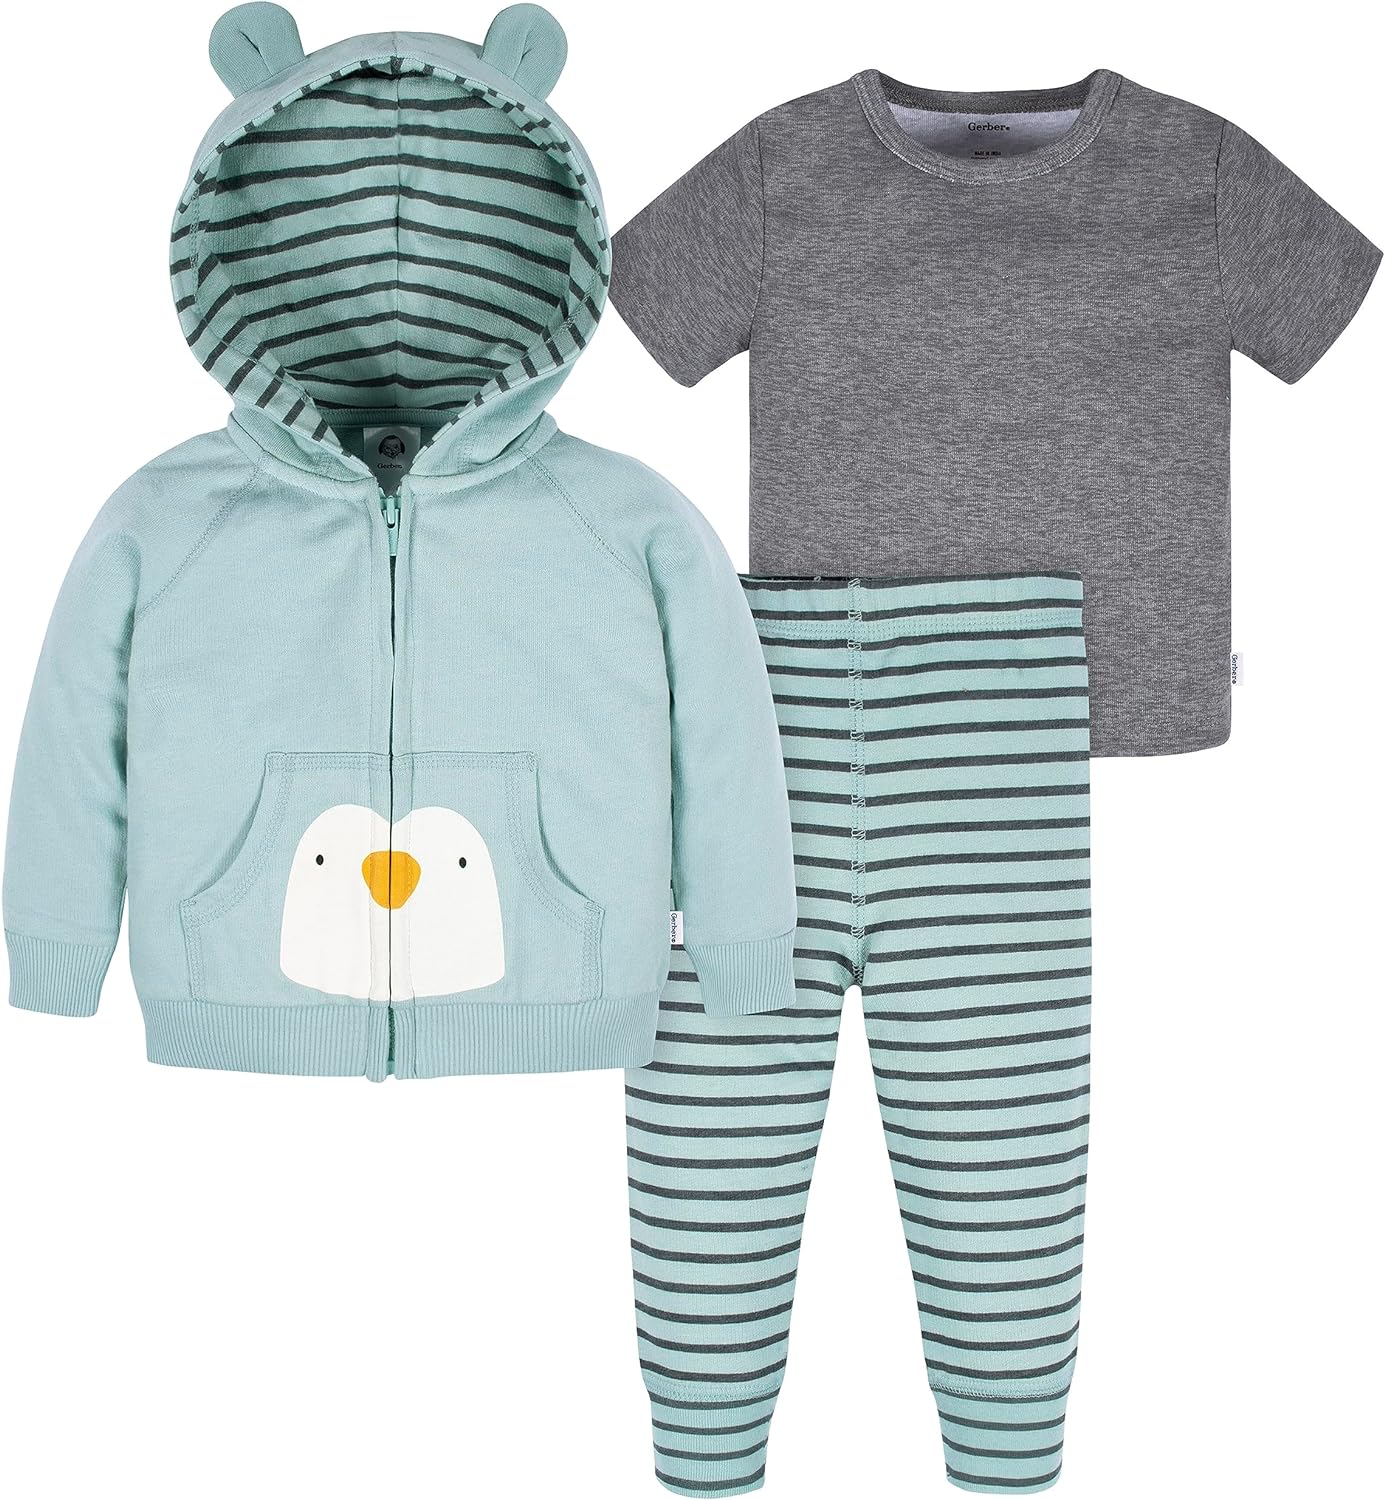 Adorable and Comfy: Our Guide to Gerber Baby Clothes for Style-Savvy Parents